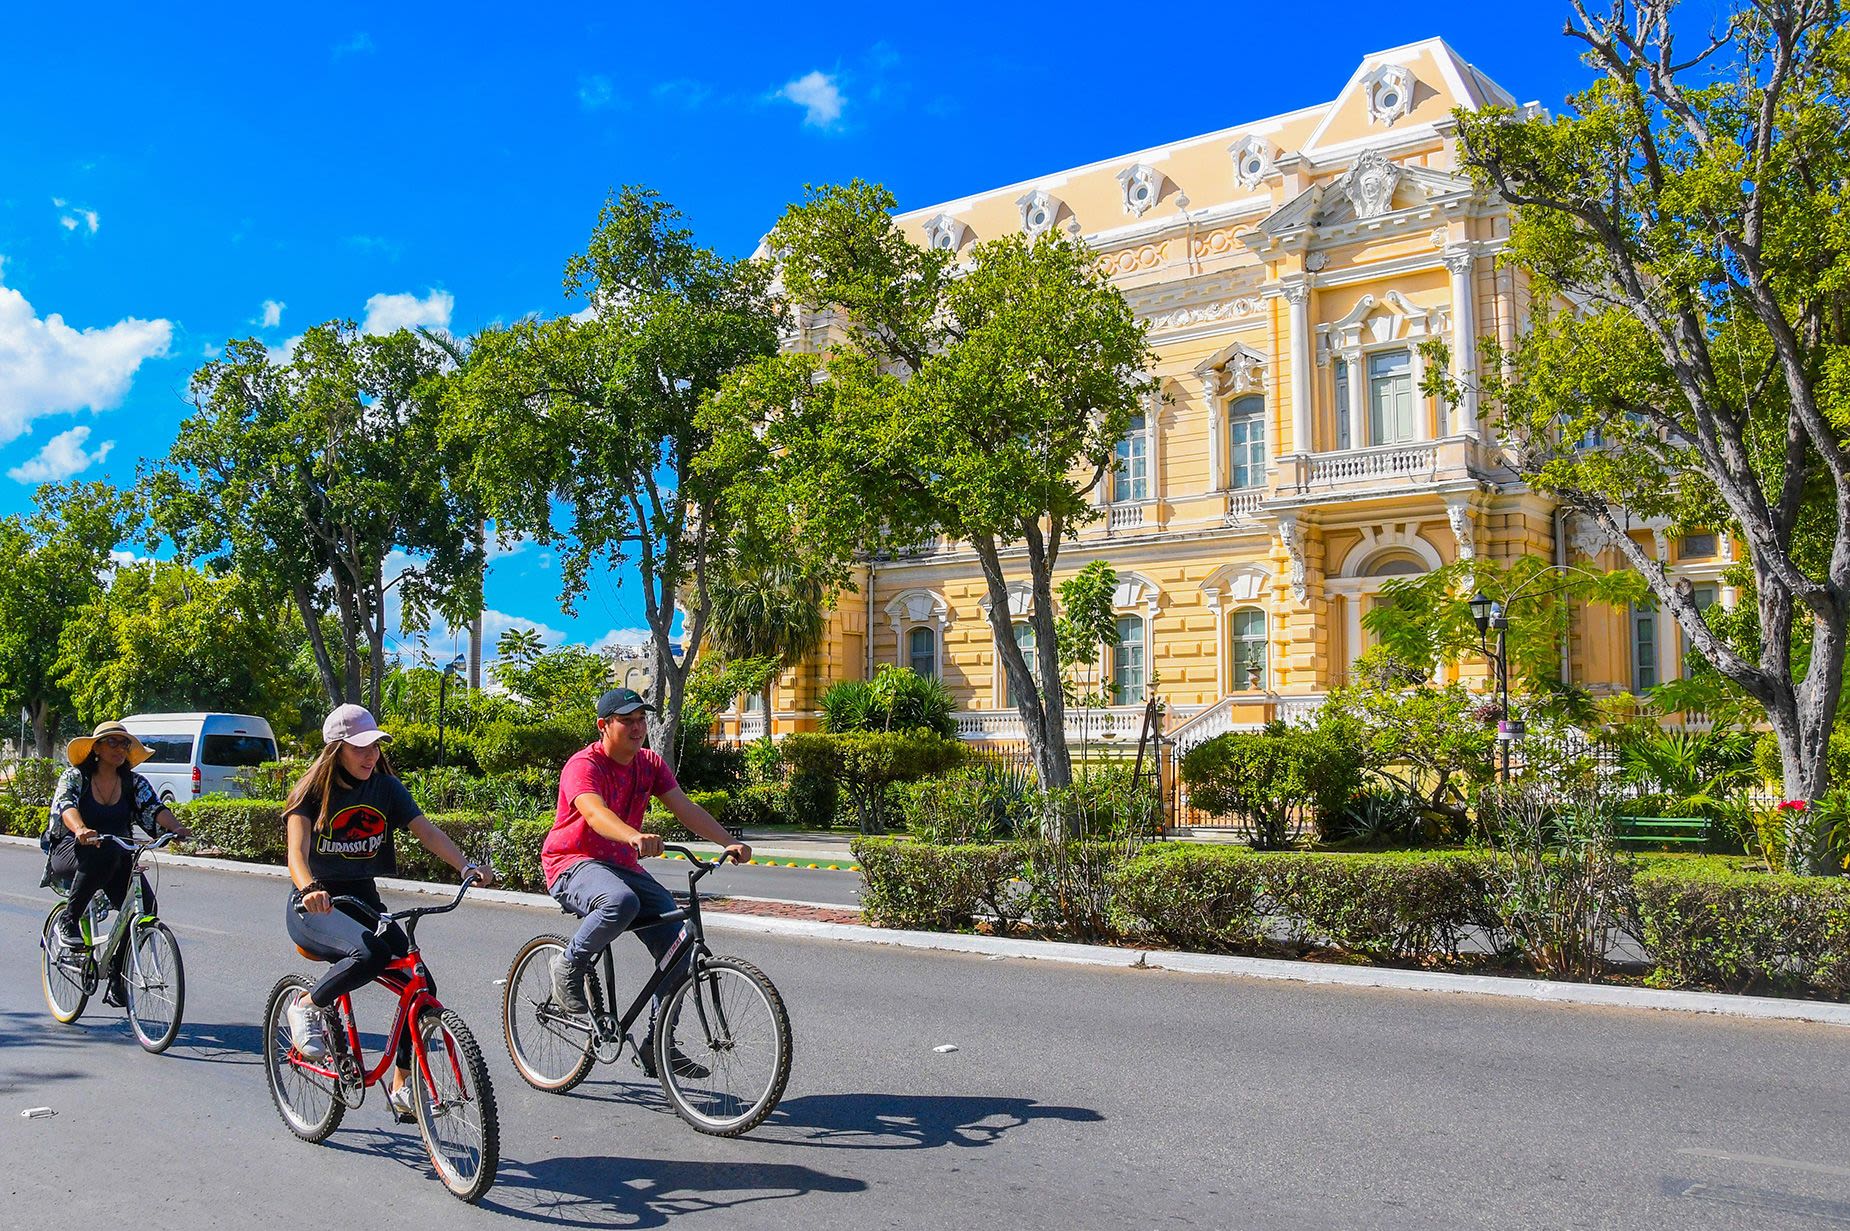 2HCAHN6 People biking on the Bicycle Route on Paseo de Montejo (closed to traffic) on Sunday , Merida Mexico

megapress images/Alamy Stock Photo